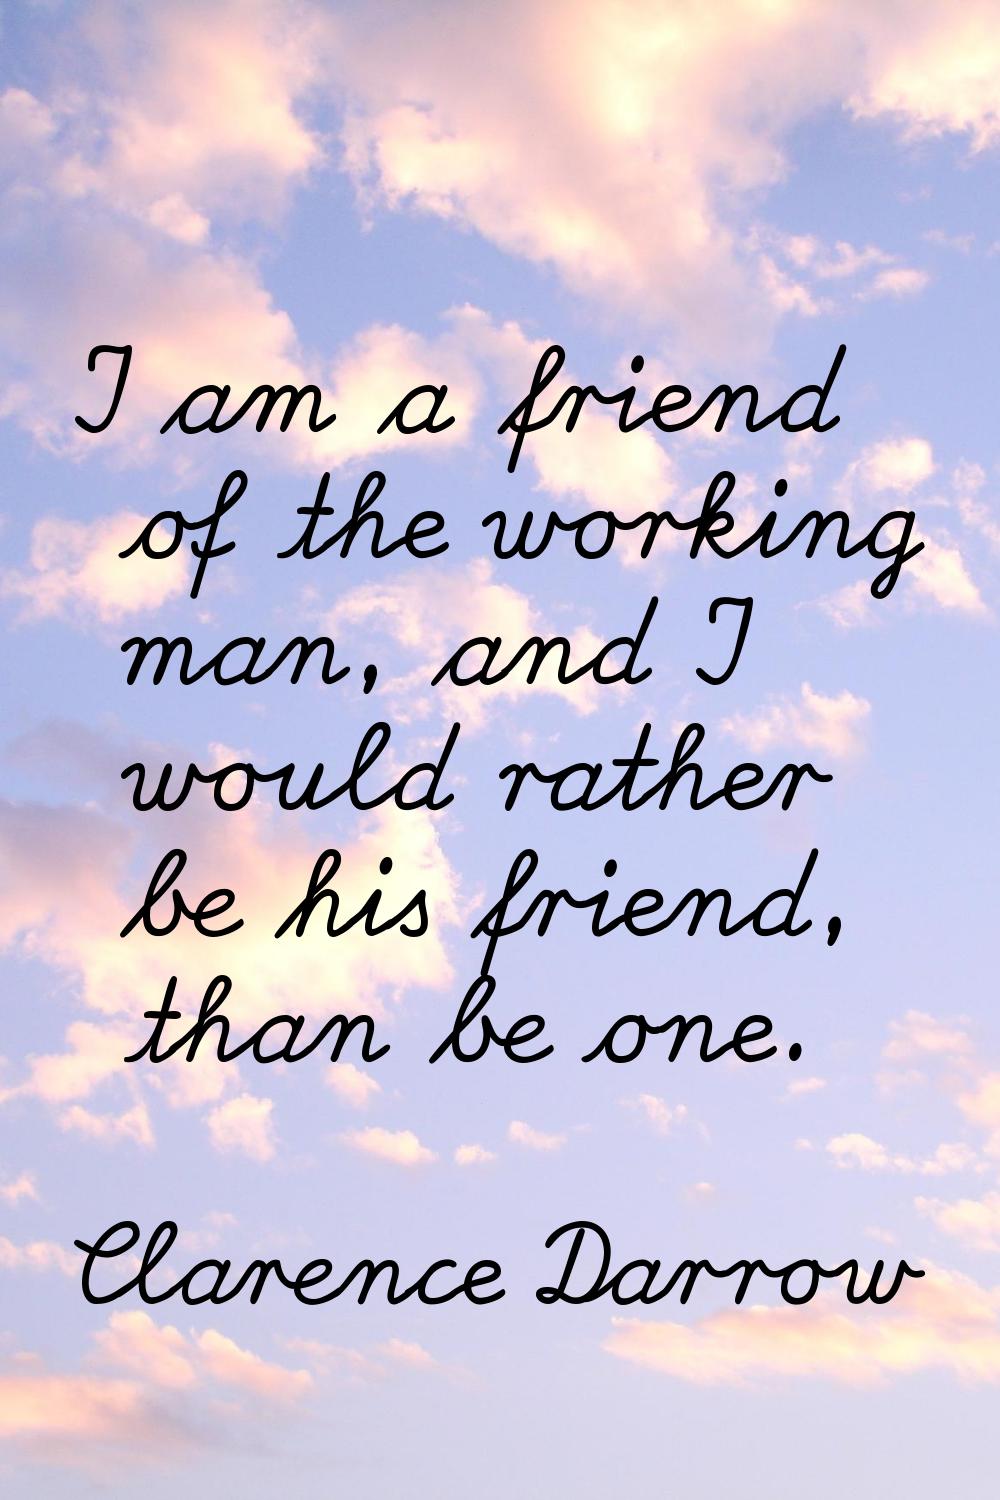 I am a friend of the working man, and I would rather be his friend, than be one.